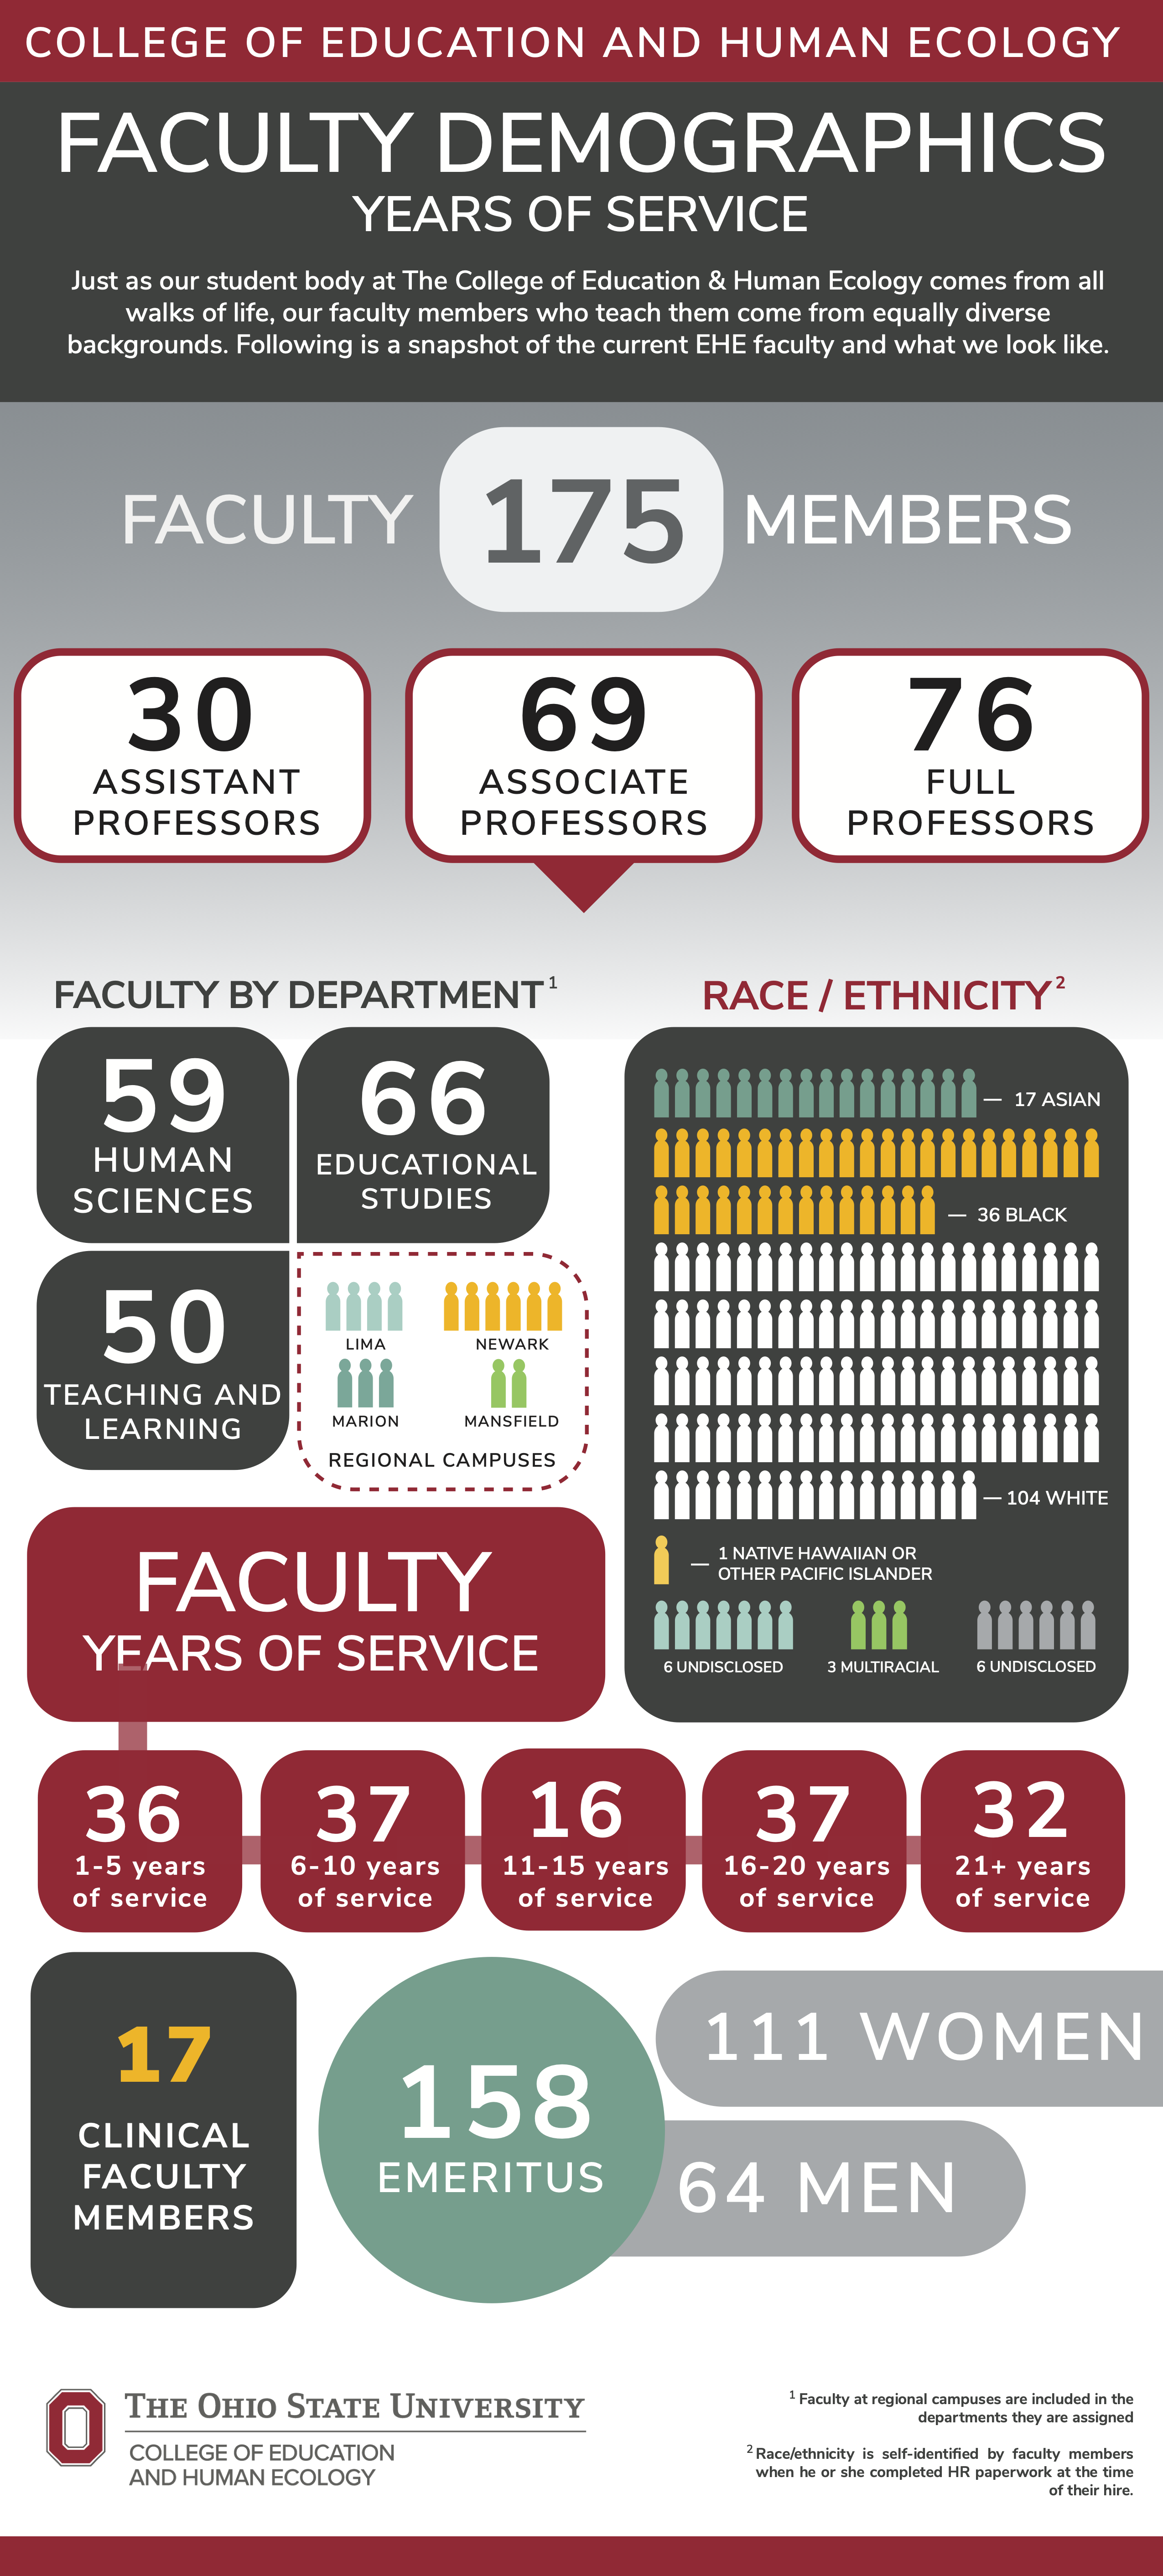 Infographic for the College of Education and Human Ecology faculty demographics.